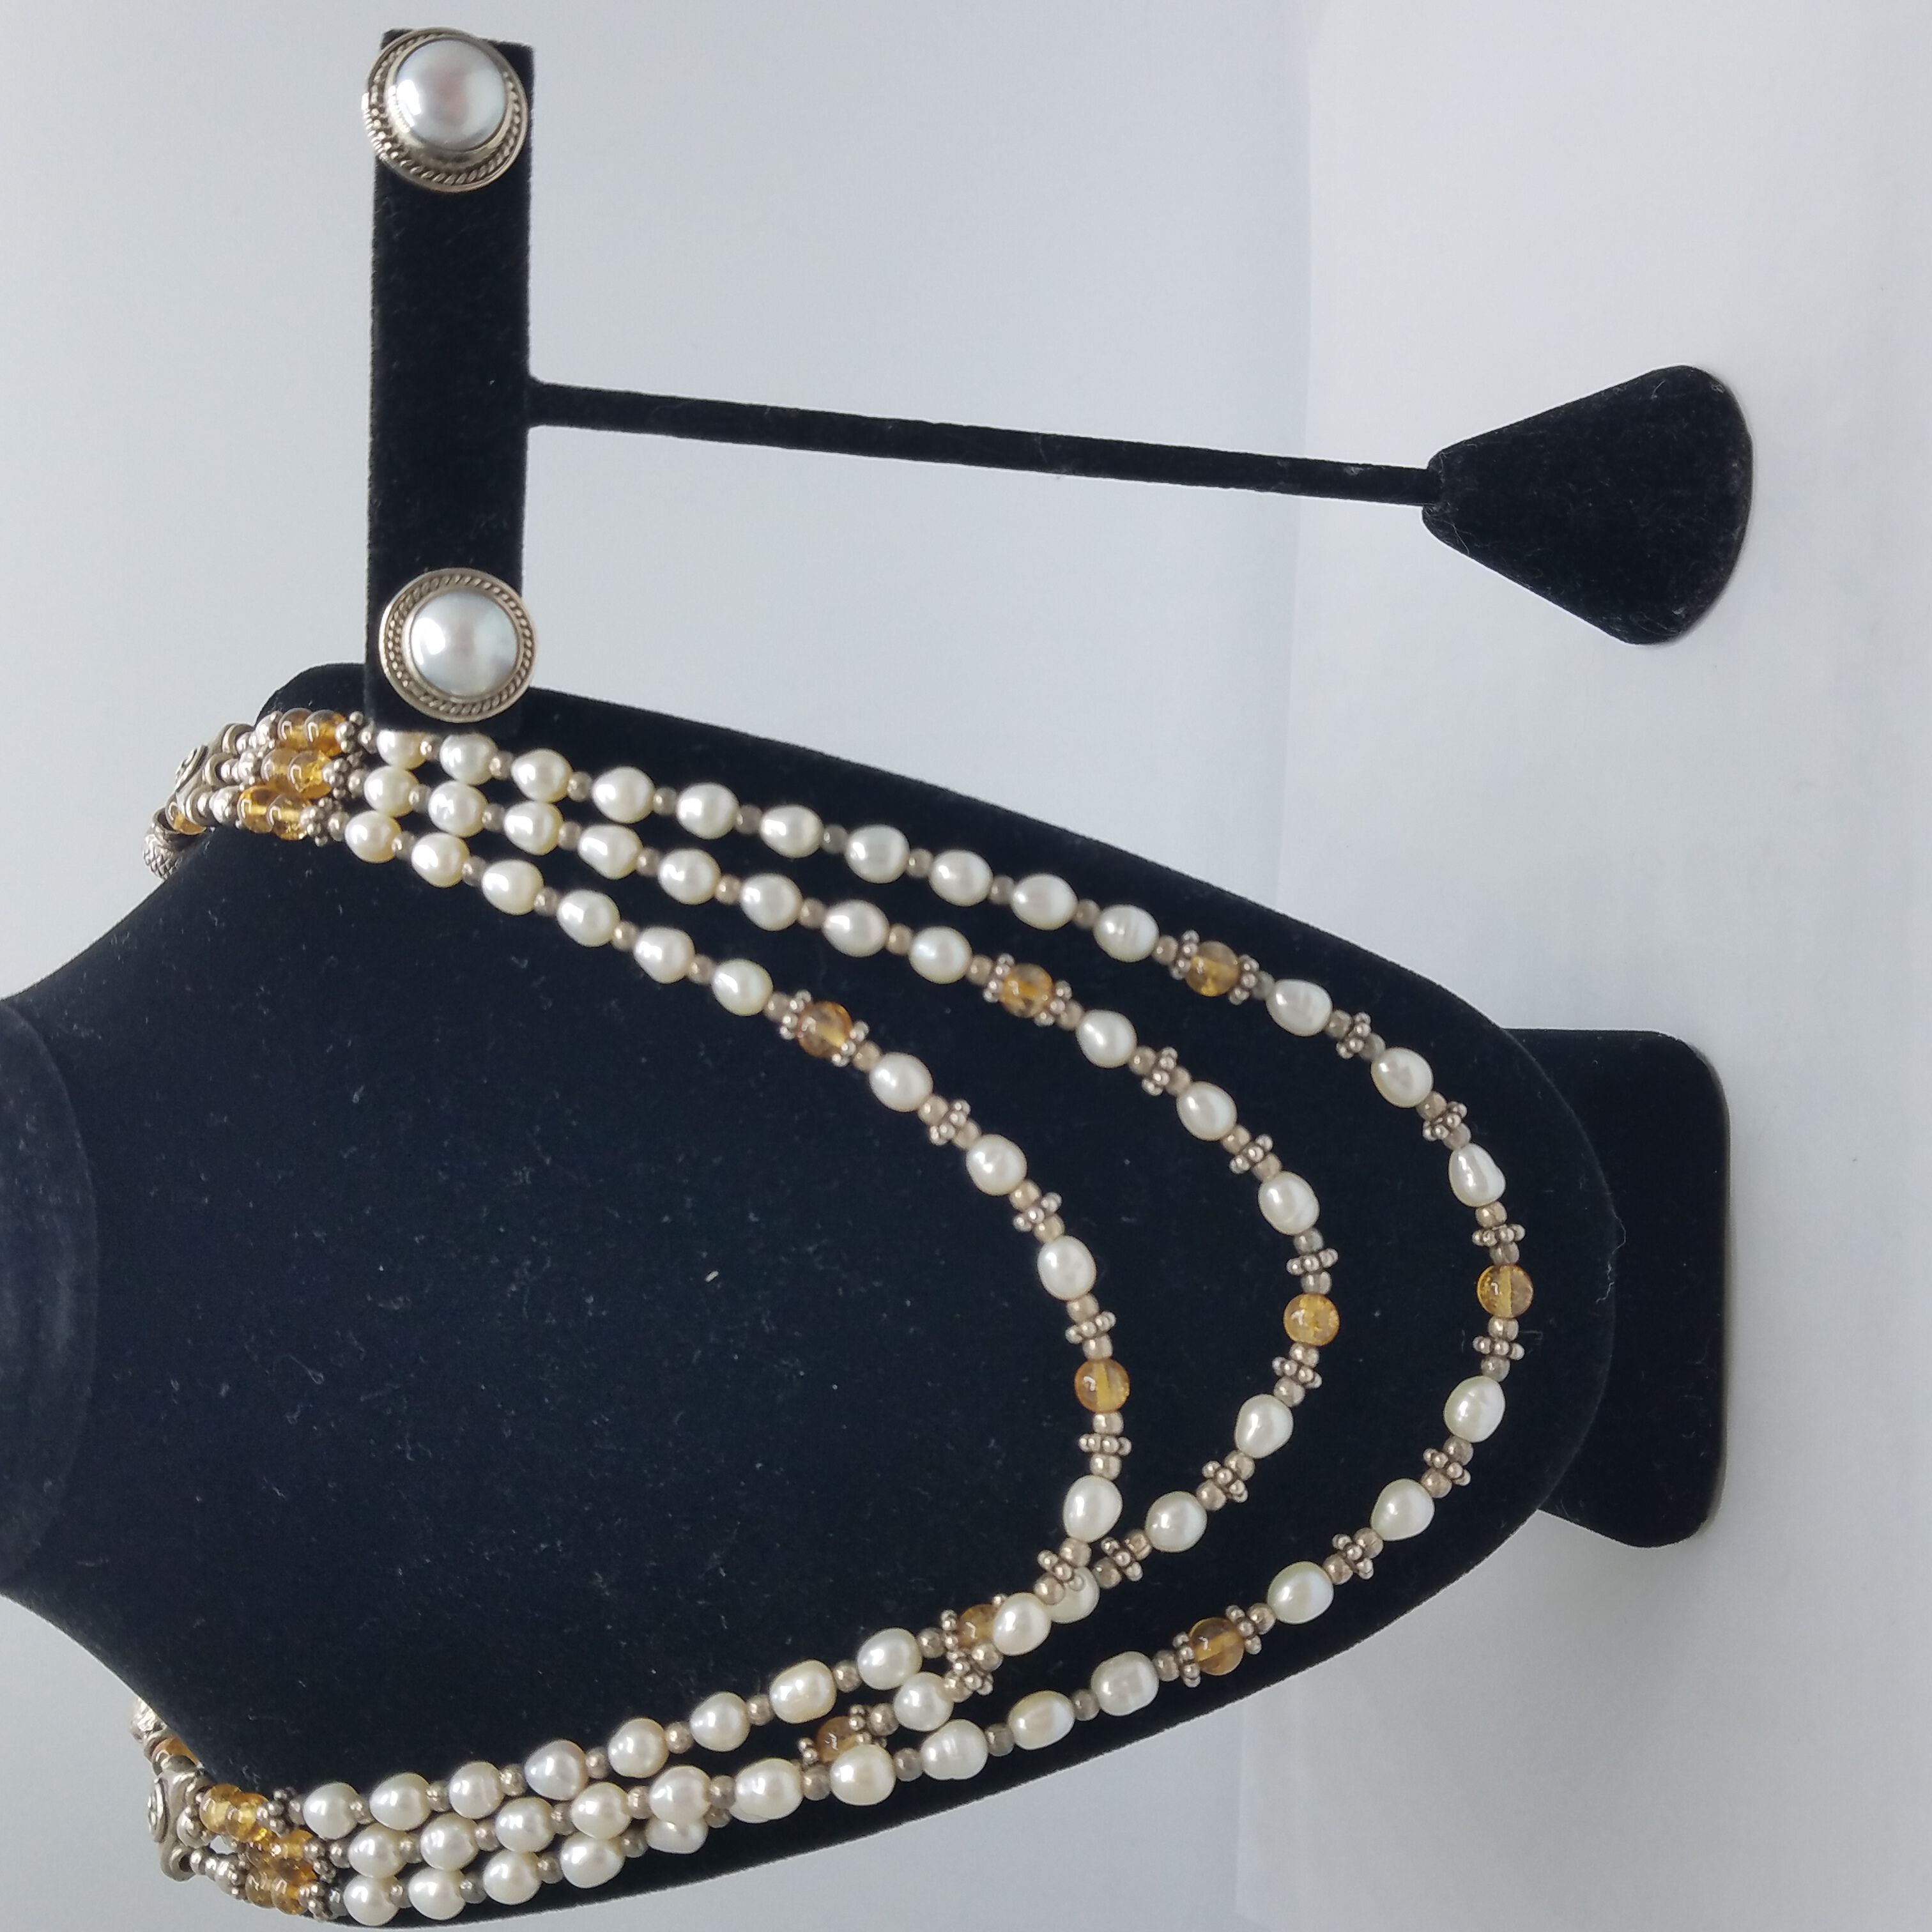 AVON Pearl Necklace Set Price Starting From Rs 2,067 | Find Verified  Sellers at Justdial